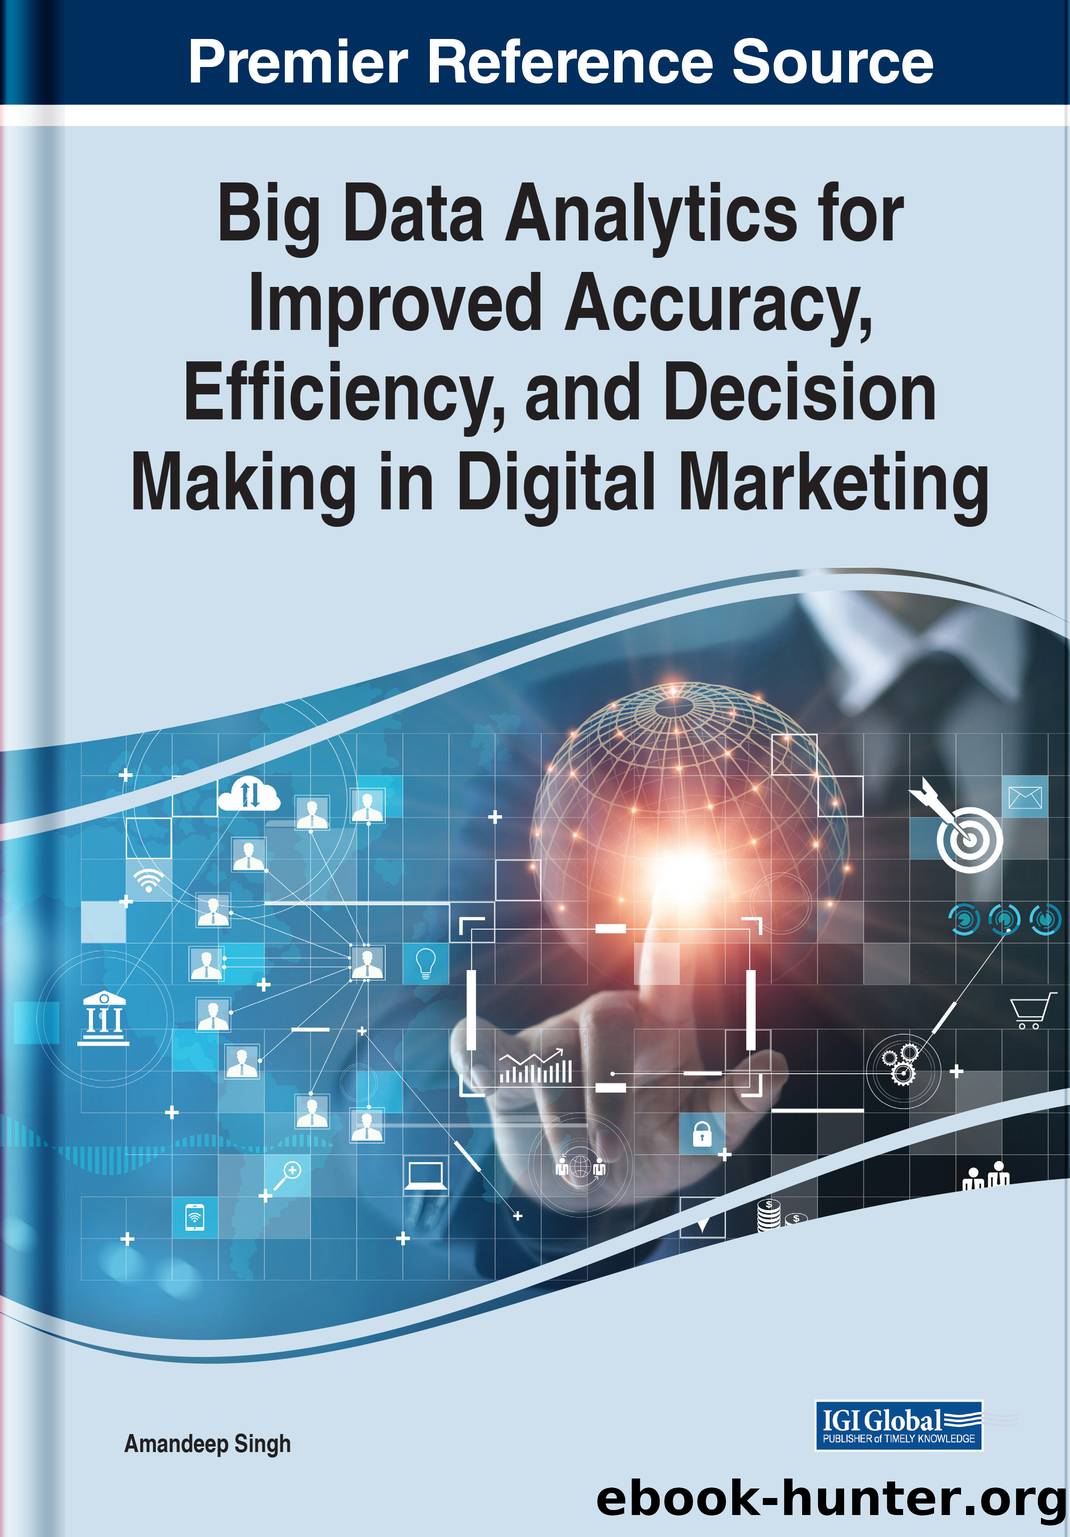 Big Data Analytics for Improved Accuracy, Efficiency, and Decision Making in Digital Marketing by Singh Amandeep